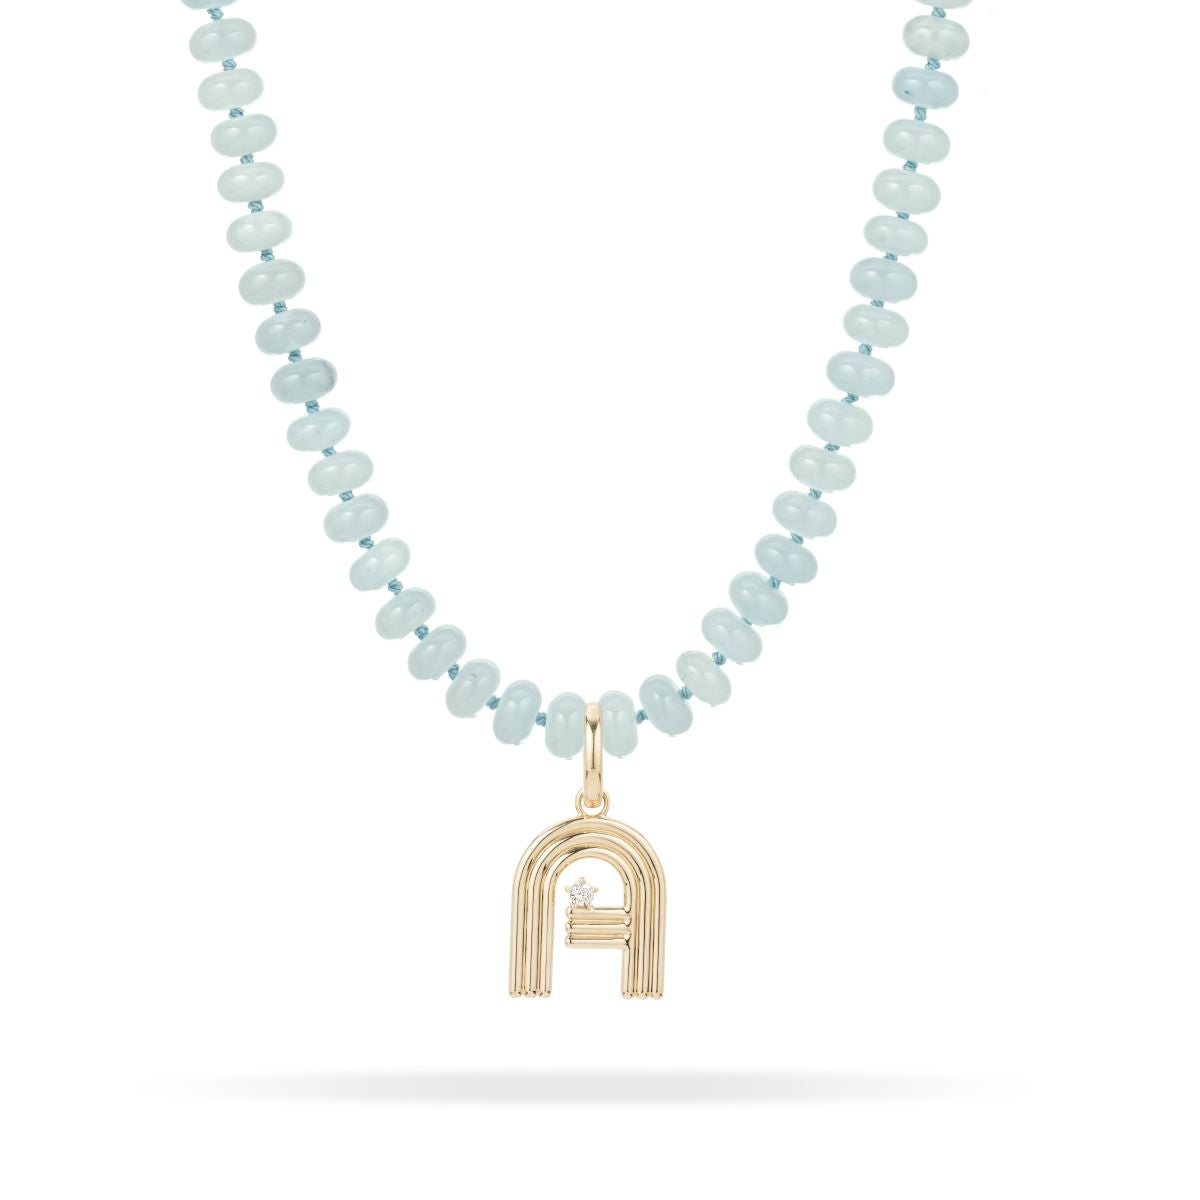 Shades of Light Blue Gemstone Initial Necklace